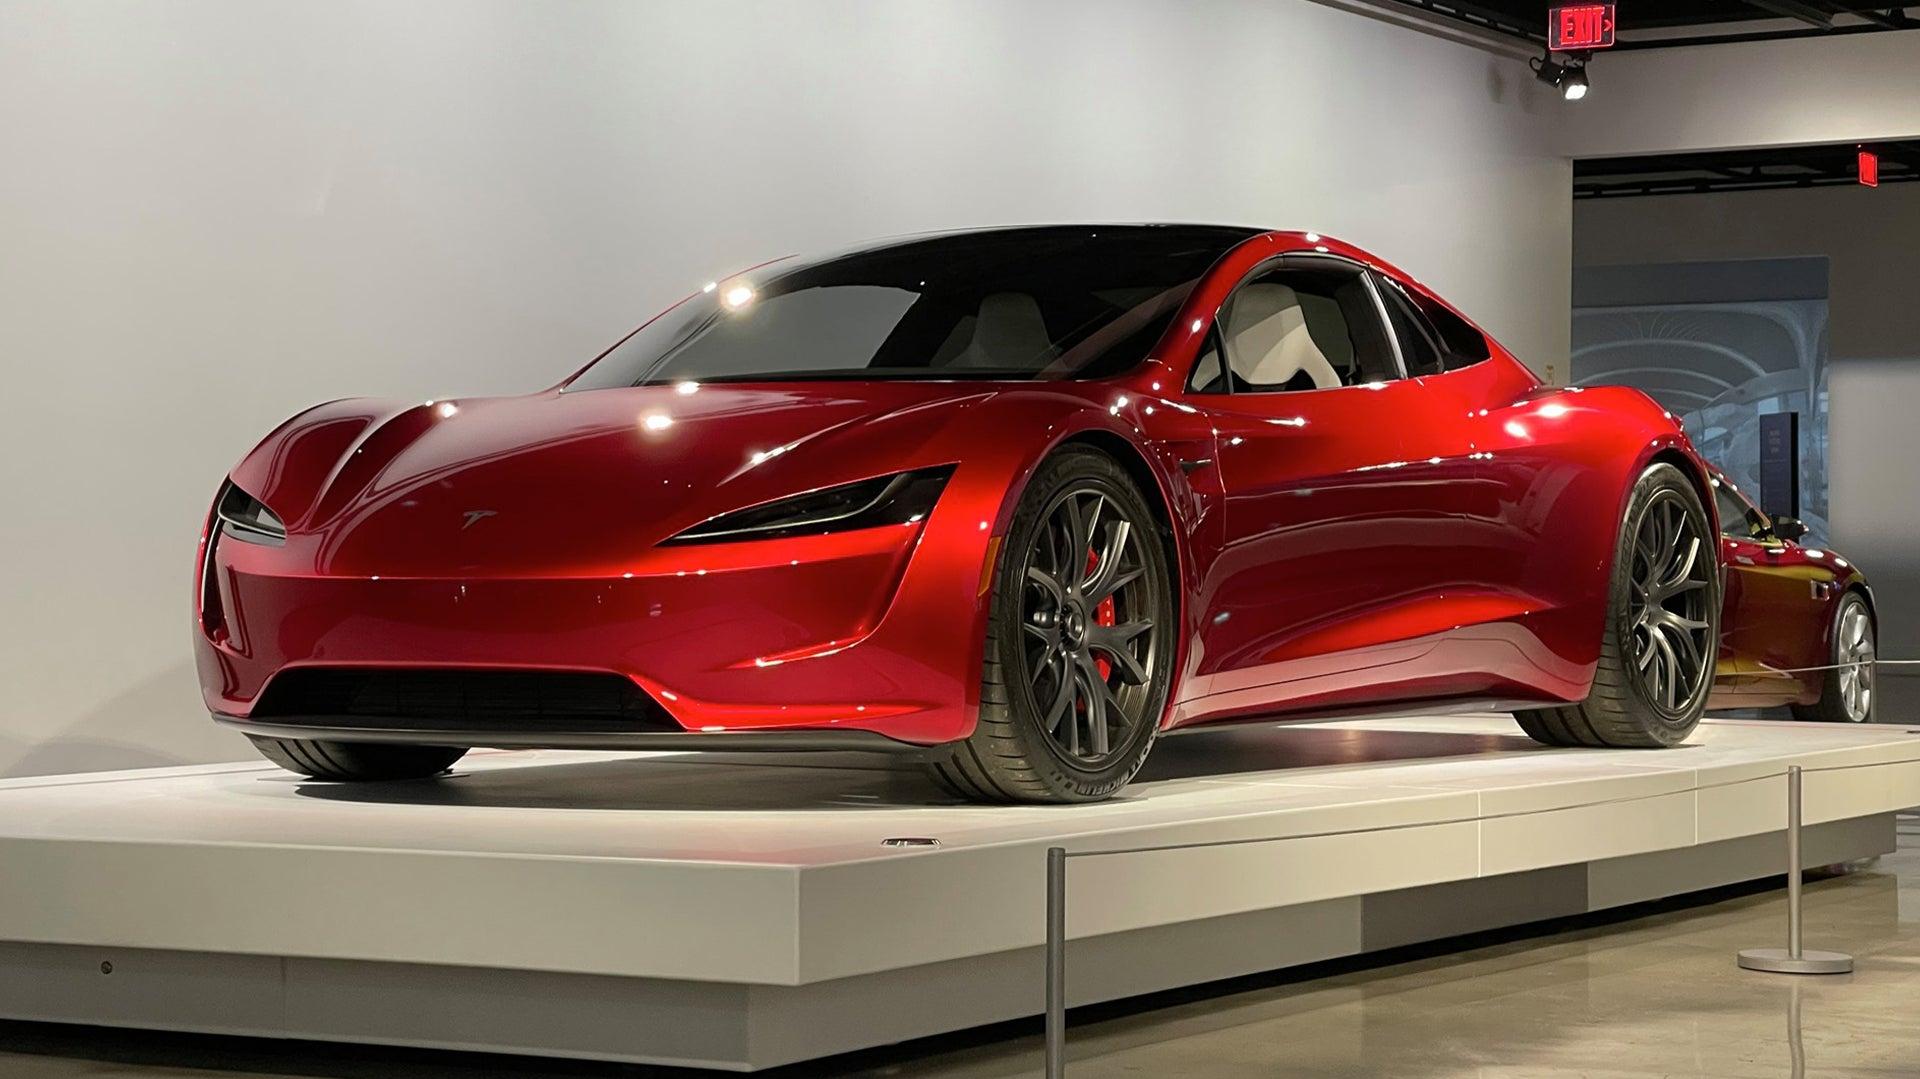 The New Tesla Roadster Prototype Is On Rare Public Display At